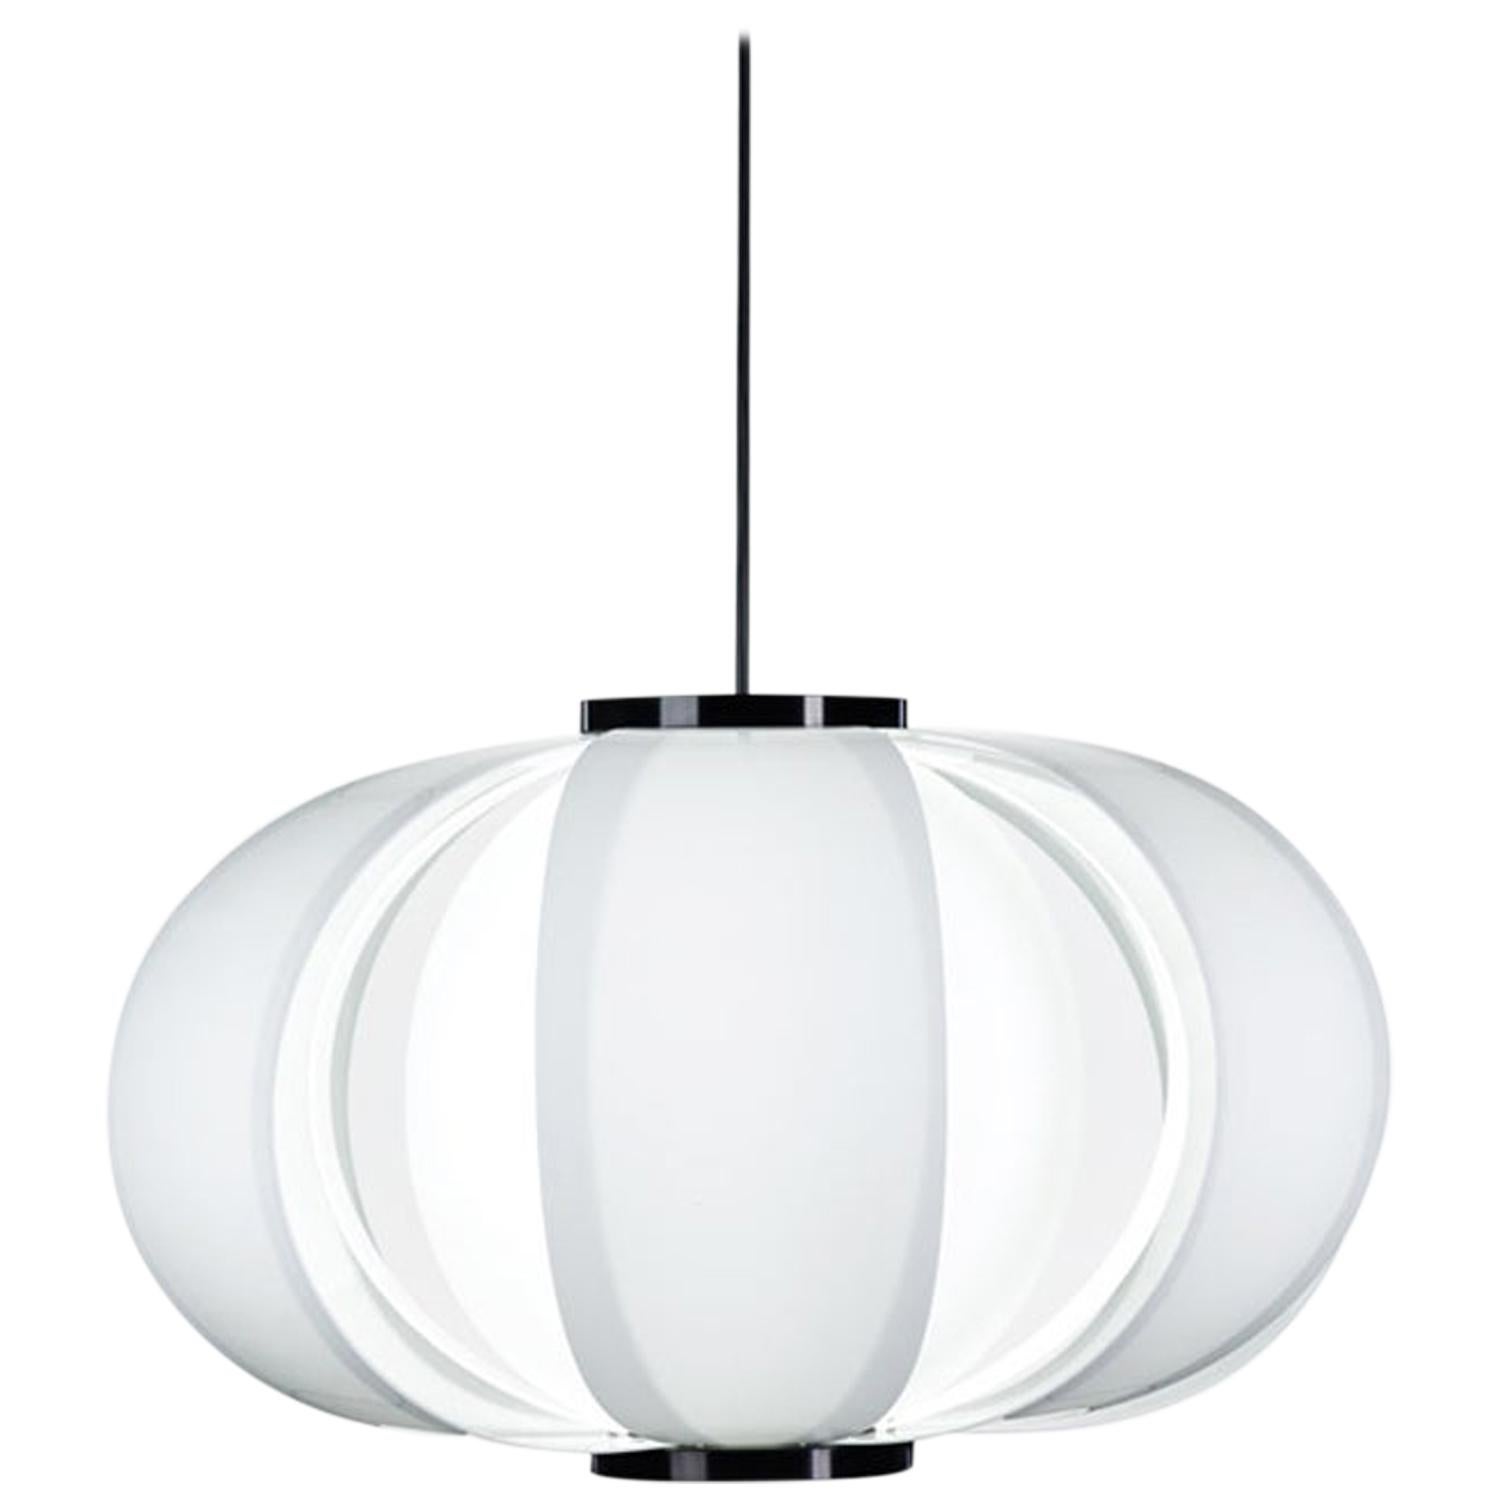 Coderch Large Disa Methacrylate Hanging Lamp by Tunds